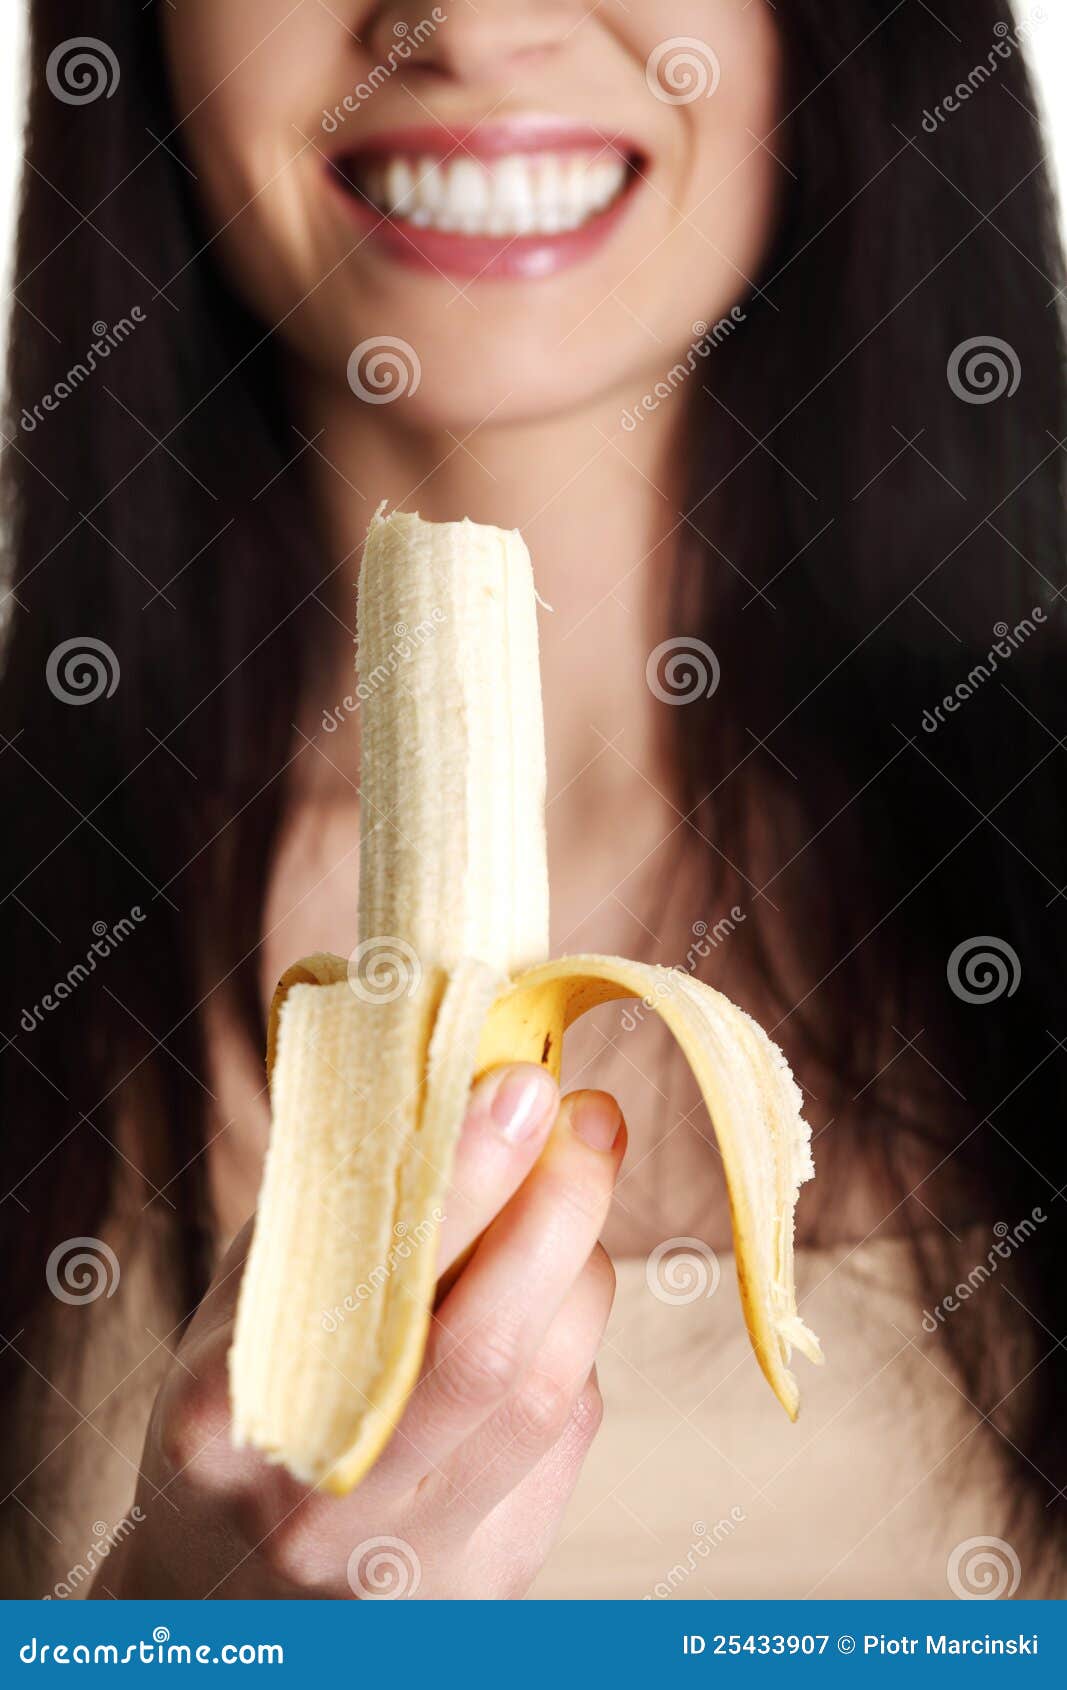 dave mai recommends Woman Eating Banana Picture